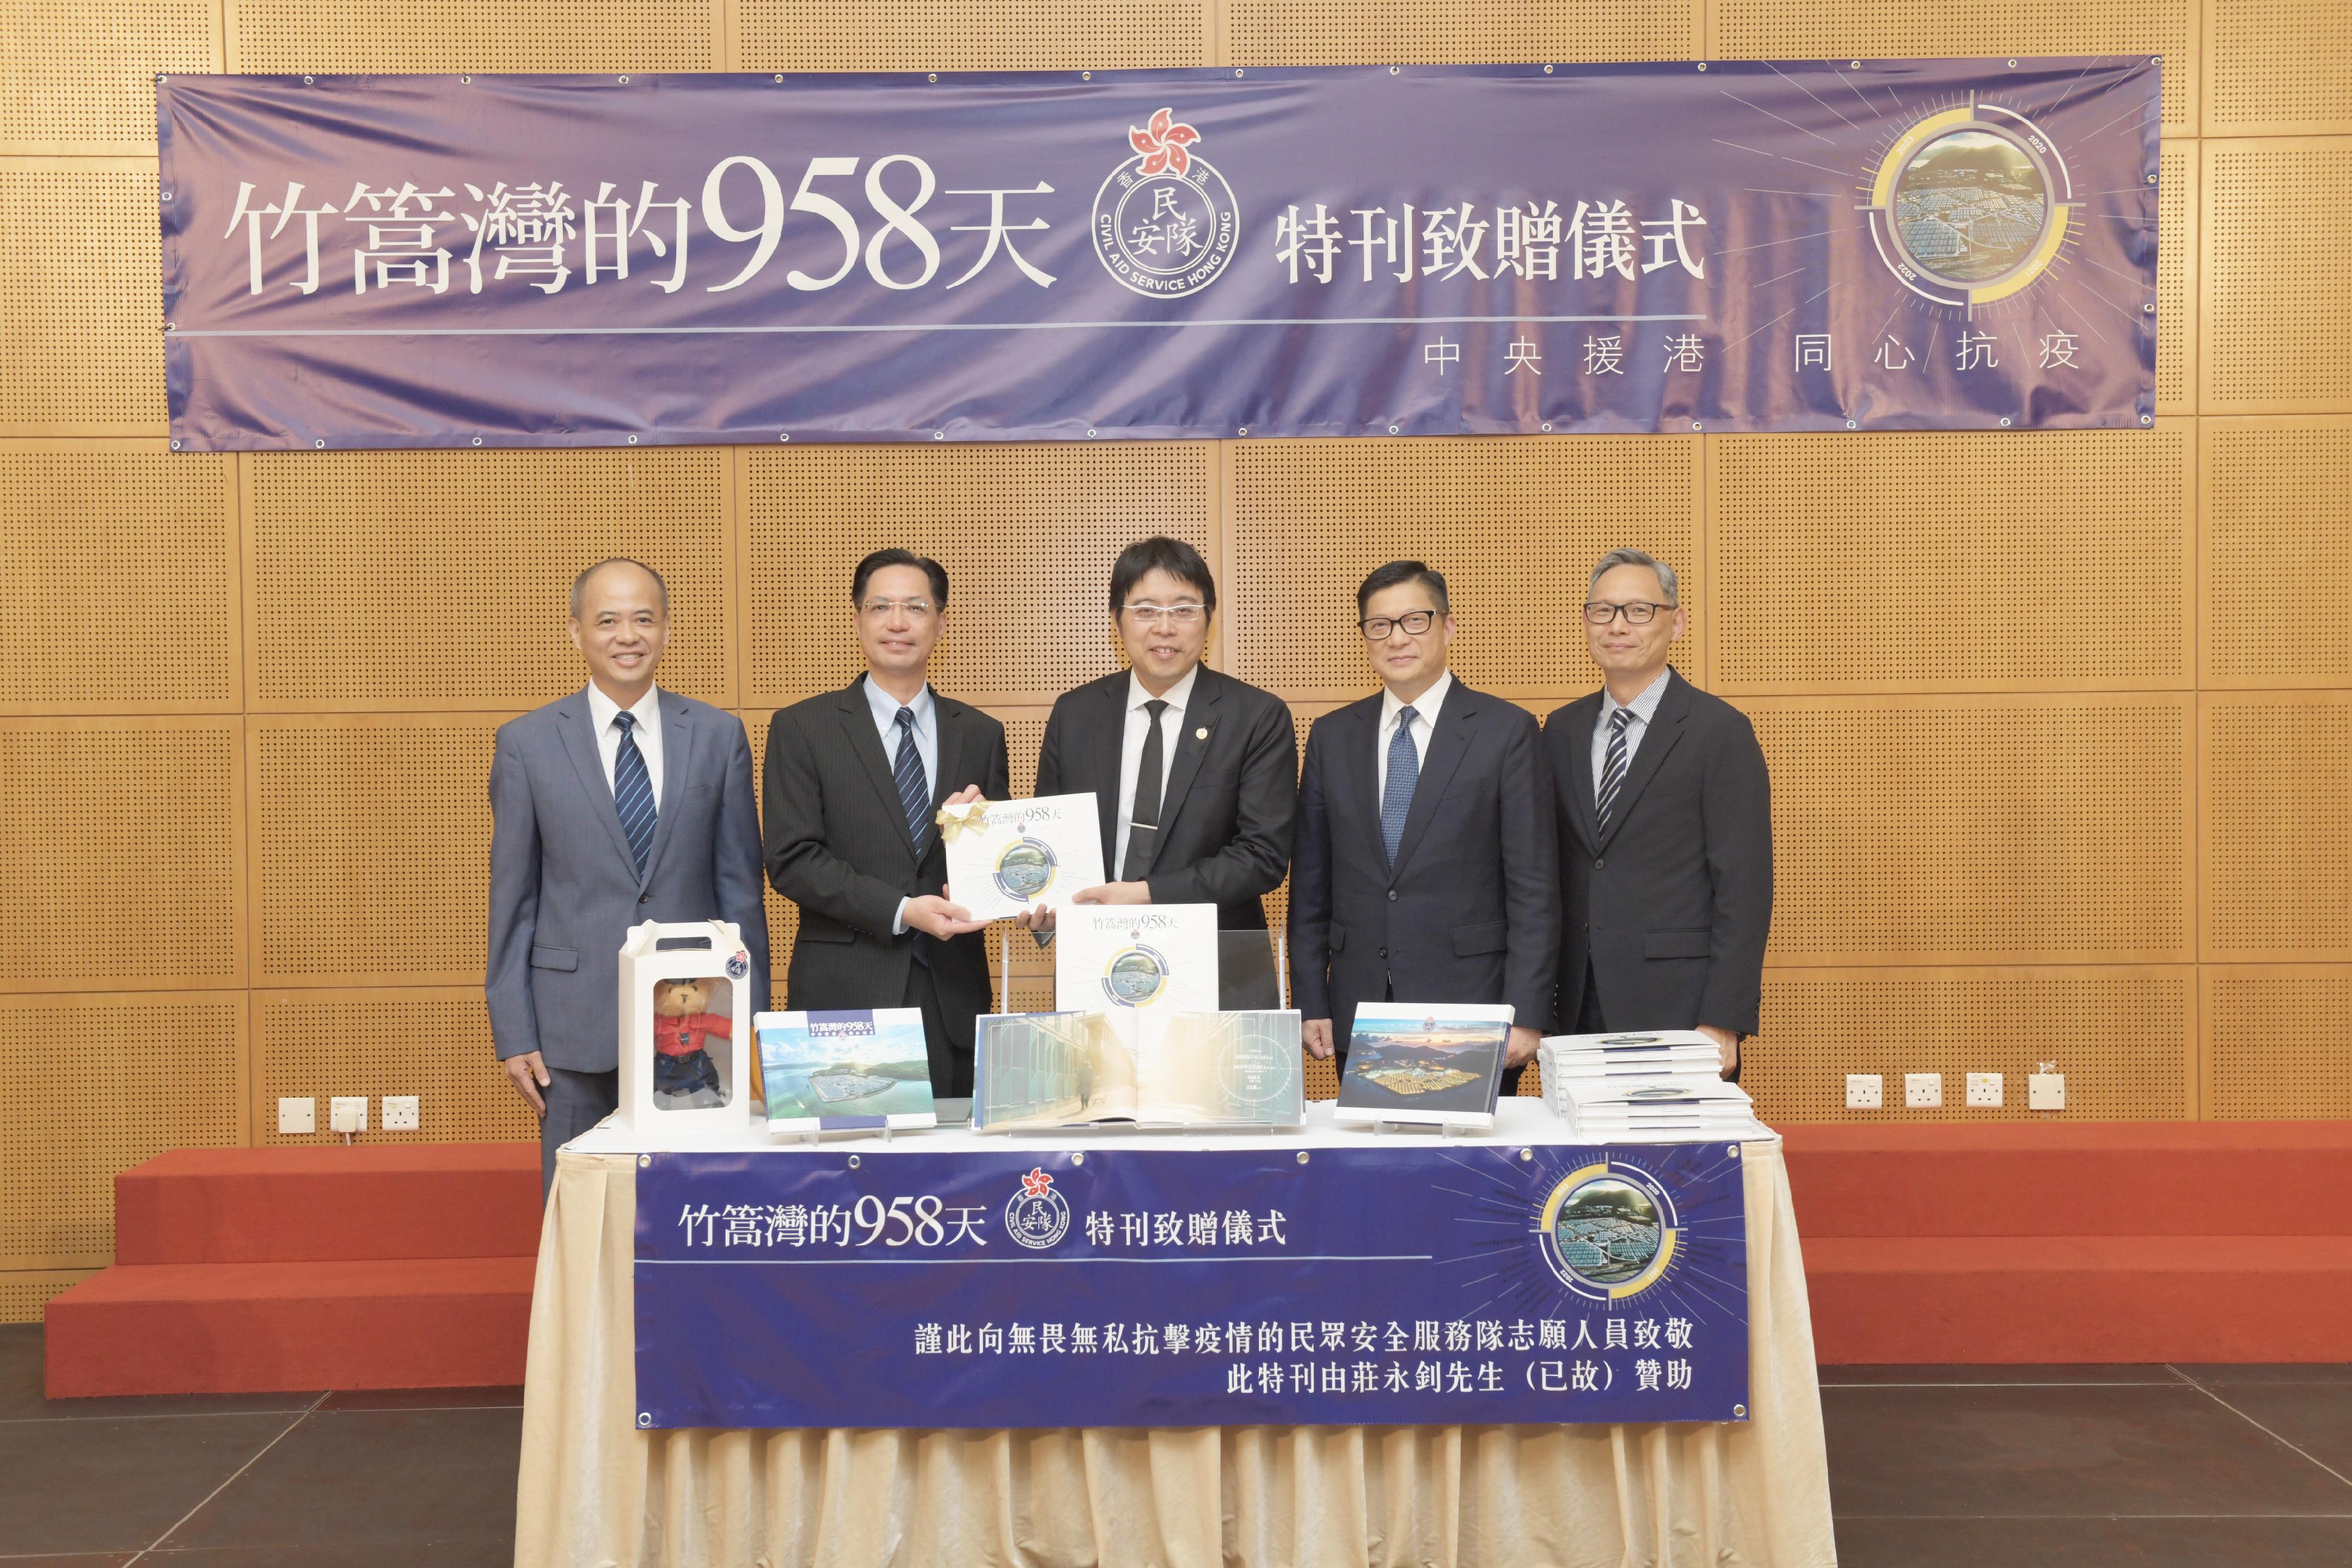 The Civil Aid Service (CAS) today (June 16) held a presentation ceremony for the Penny's Bay commemorative booklet "958 days in Penny's Bay". Witnessed by the Secretary for Security, Mr Tang Ping-keung (second right), and the Under Secretary for Security, Mr Michael Cheuk (first right), member of the National Committee of the Chinese People's Political Consultative Conference Dr Chuang Tze-cheung (centre) handed over the special booklets printed under the sponsorship in the name of his late father Mr Chuang Yung-chao to the Commissioner of the CAS, Mr Lo Yan-lai (second left), and the Chief Staff Officer of the CAS, Mr Leung Kwun-hong (first left).

 